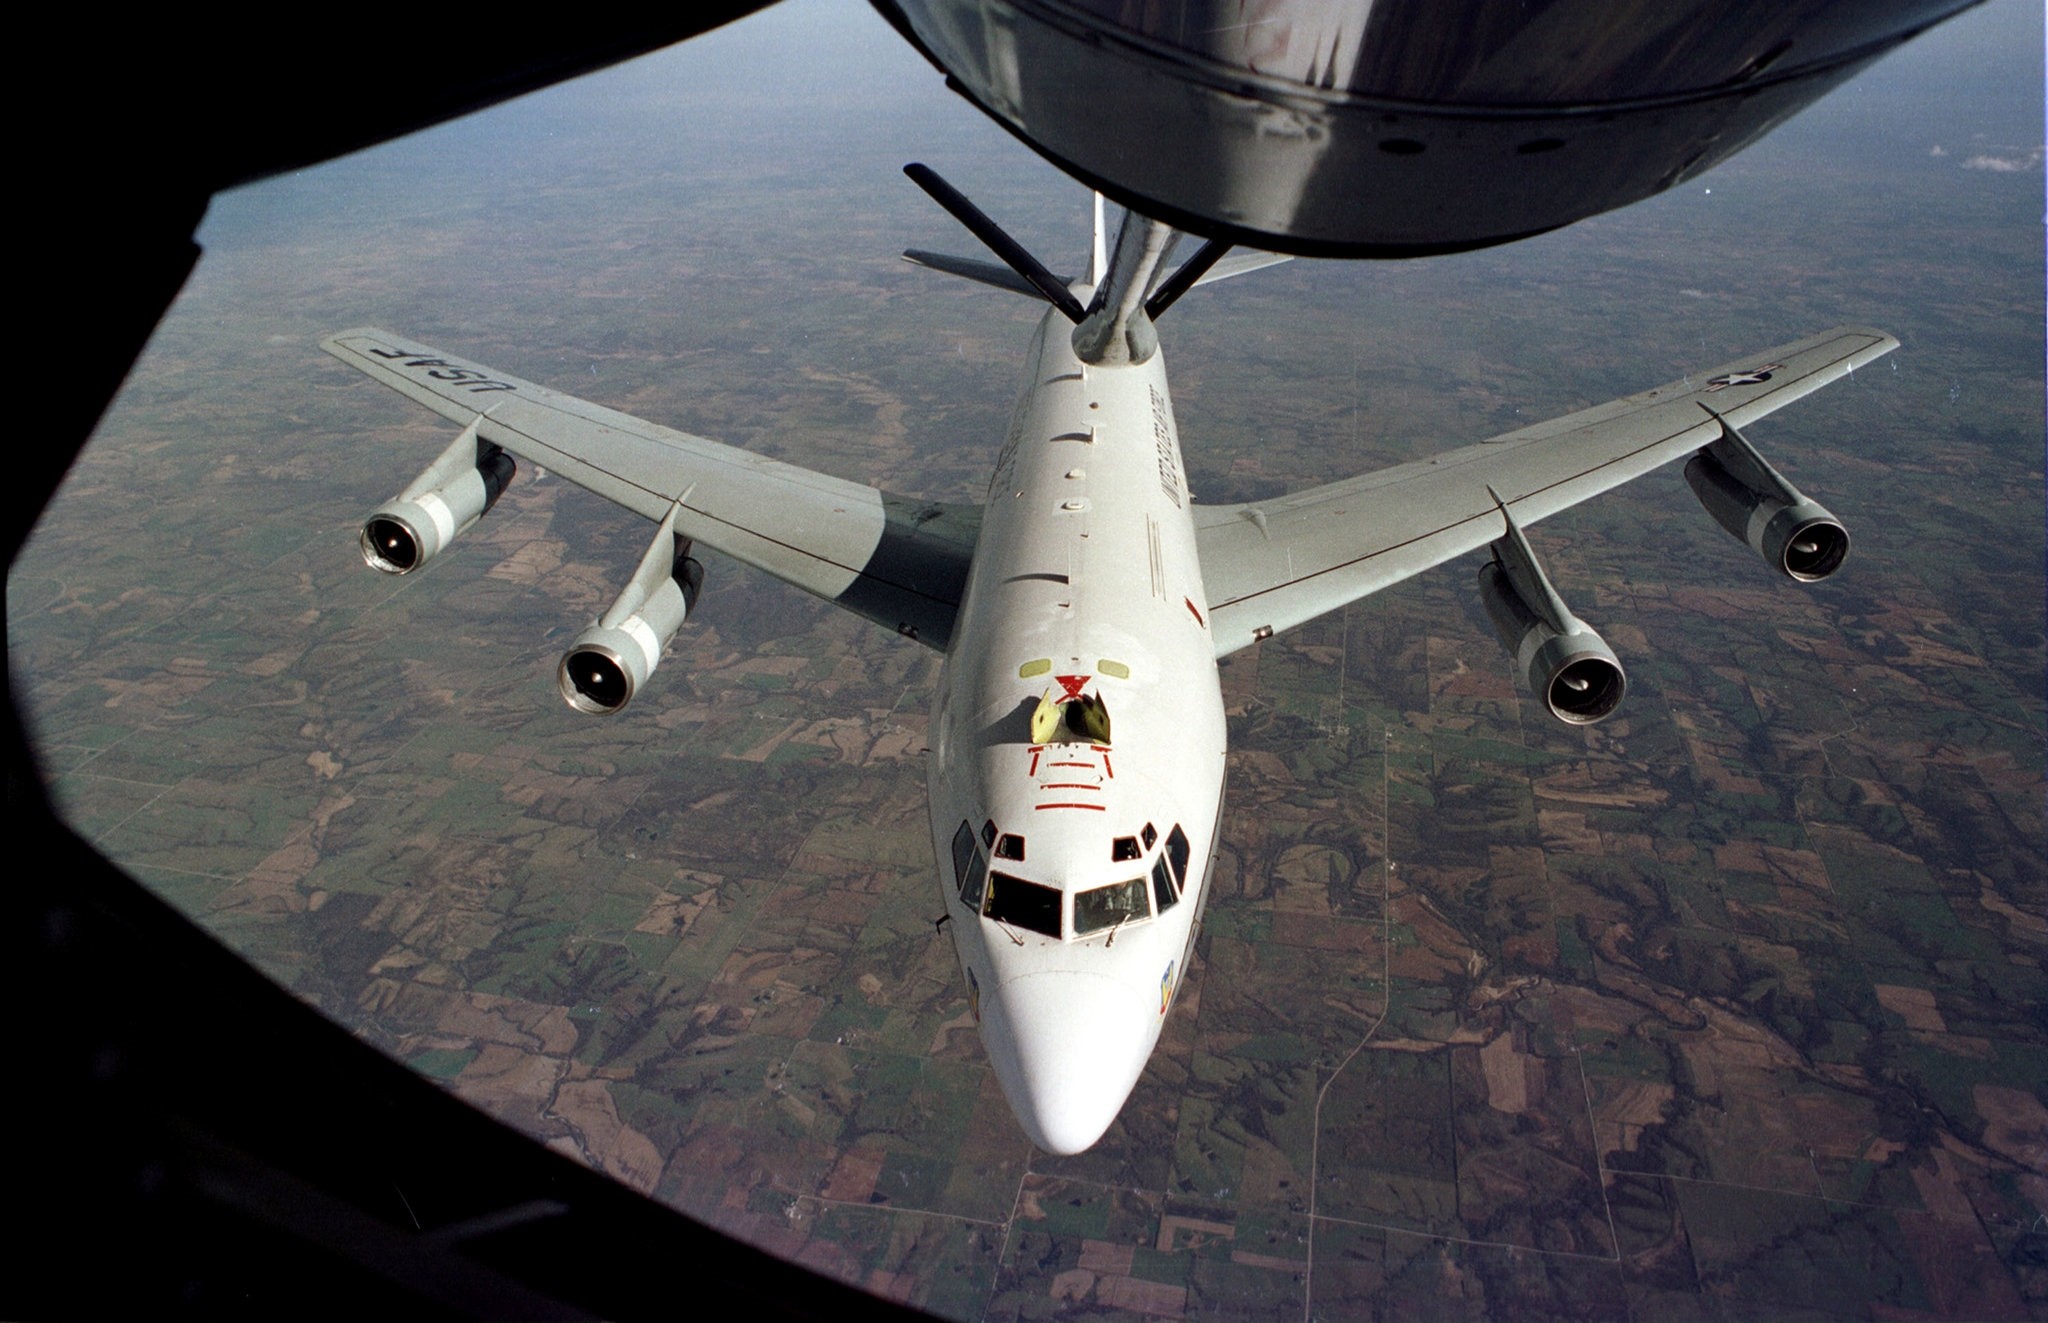 The WC-135W Constant Phoenix aircraft collects particulate and gaseous debris from the accessible regions of the atmosphere in support of the Limited Nuclear Test Ban Treaty of 1963. (REUTERS Photo)